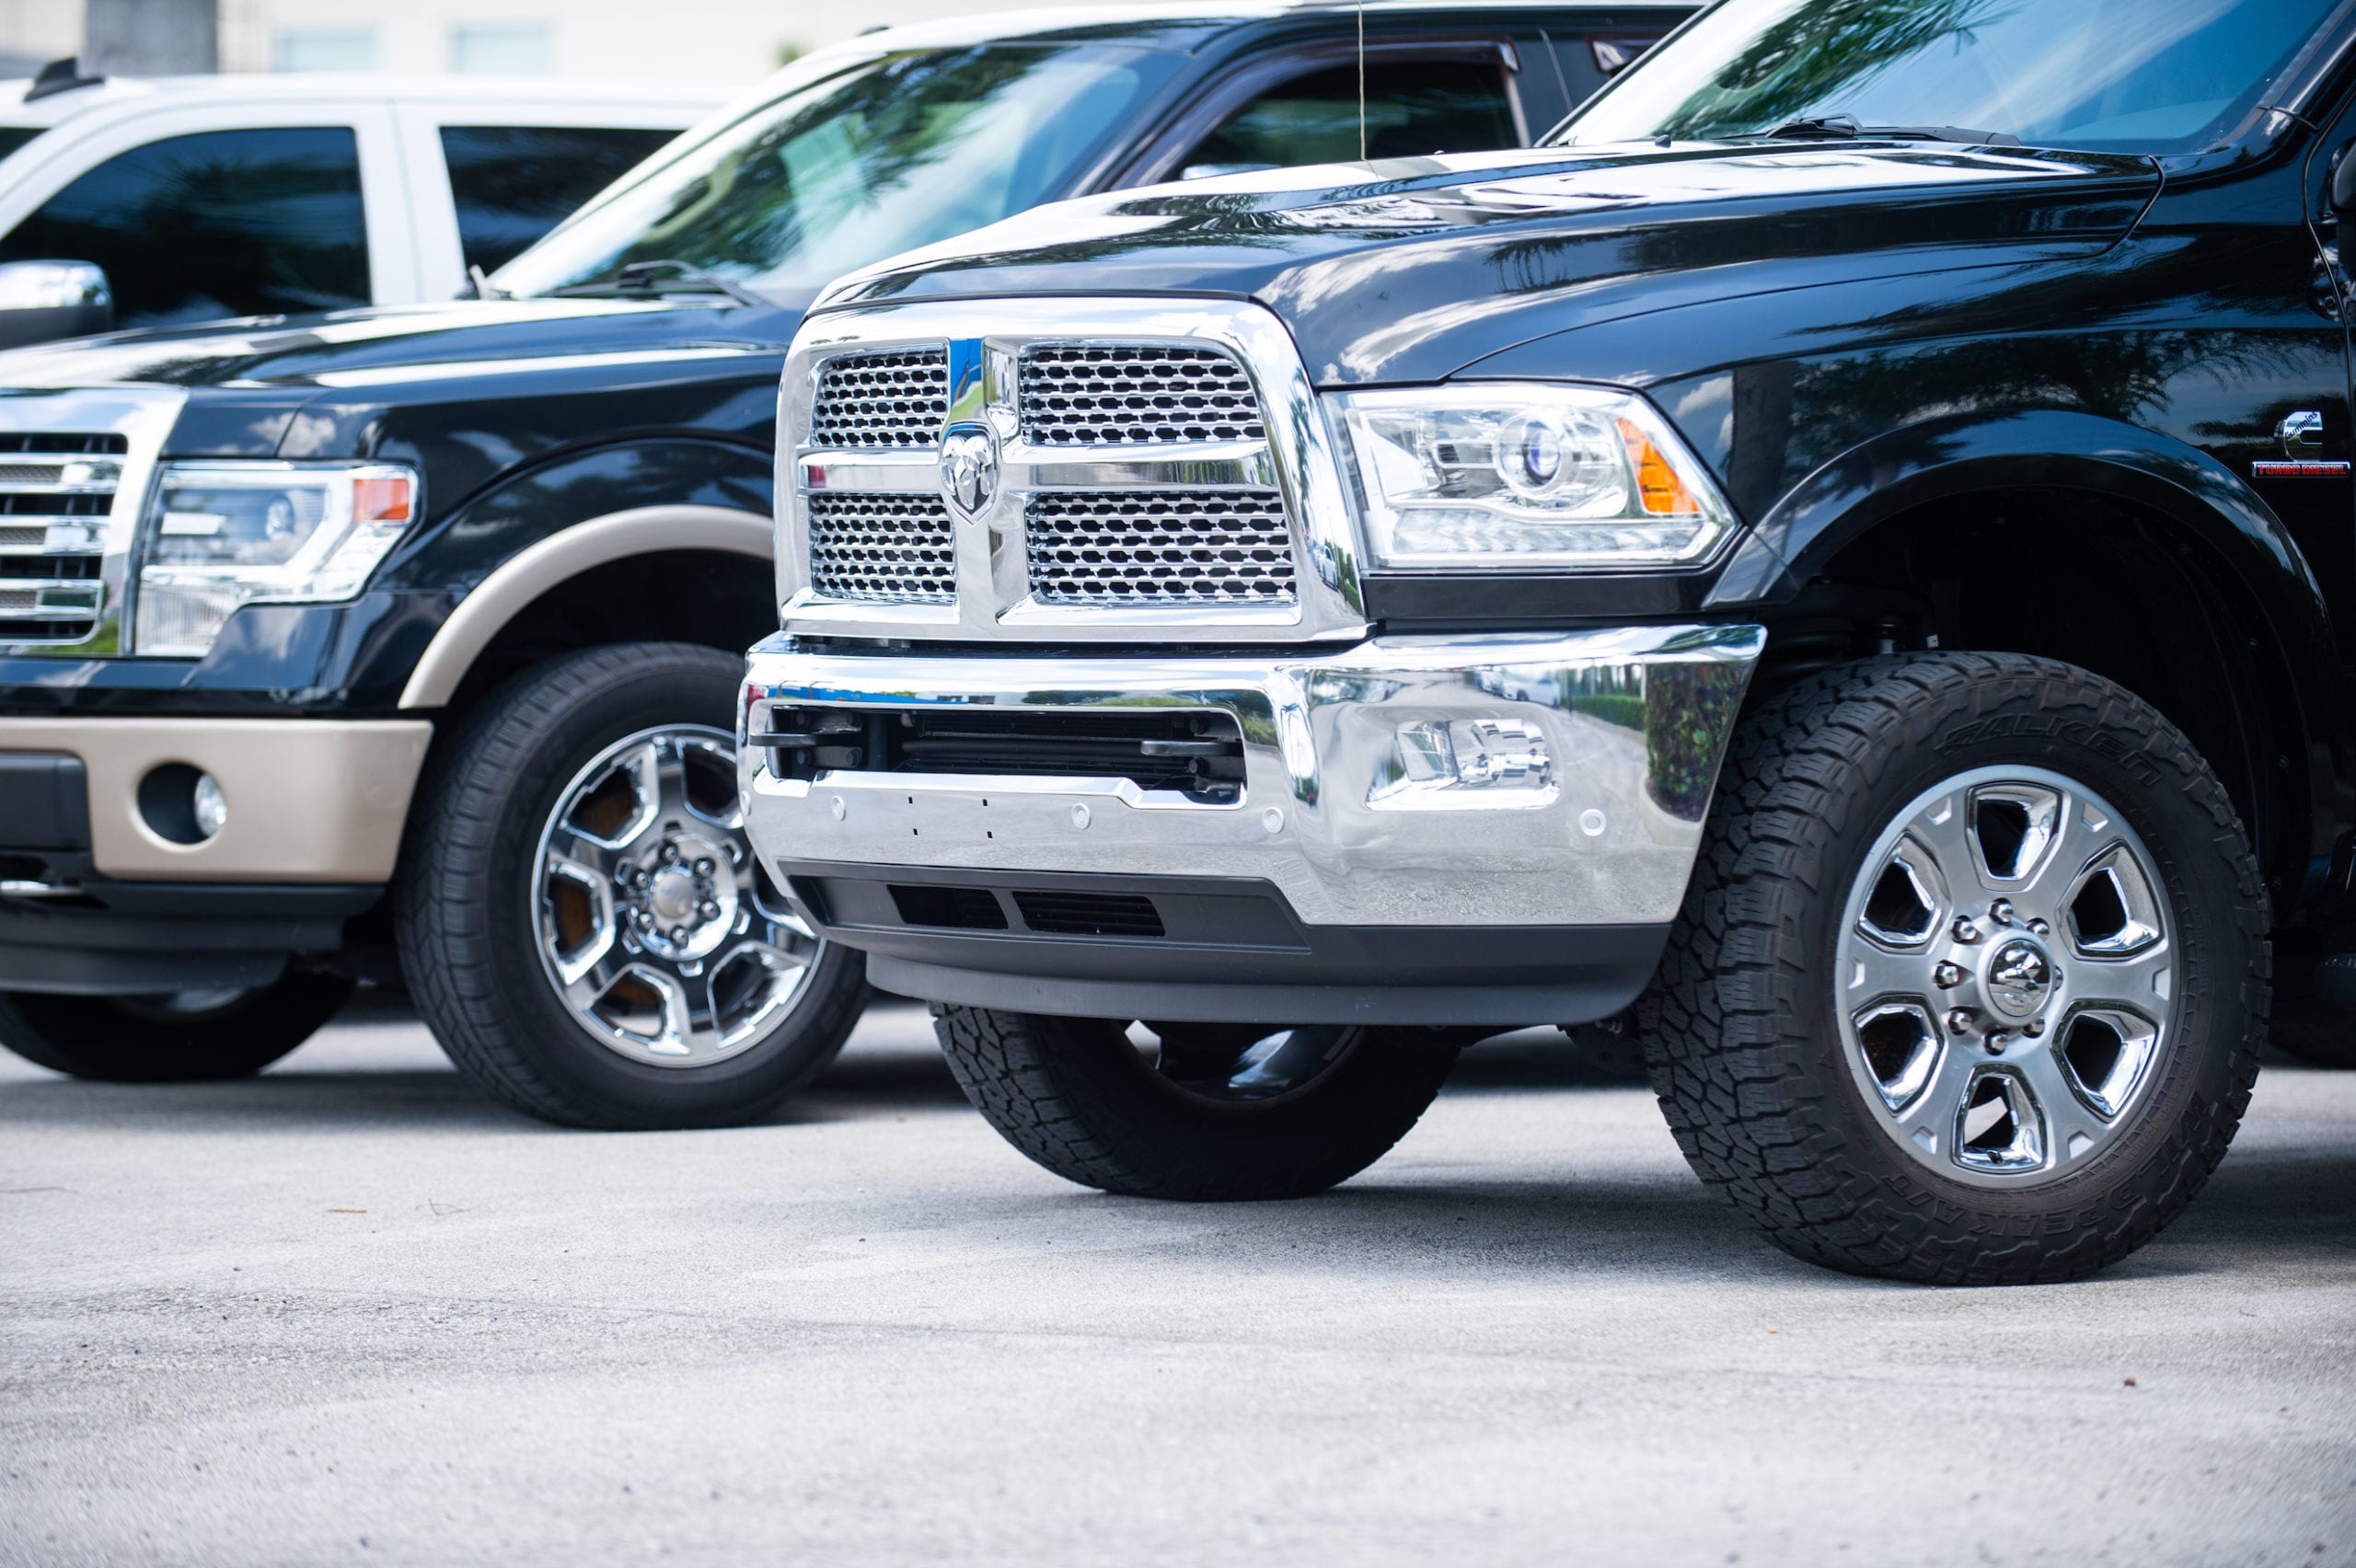 Front-side views of two black Dodge Ram trucks with heavy duty wheels with silver alloy.